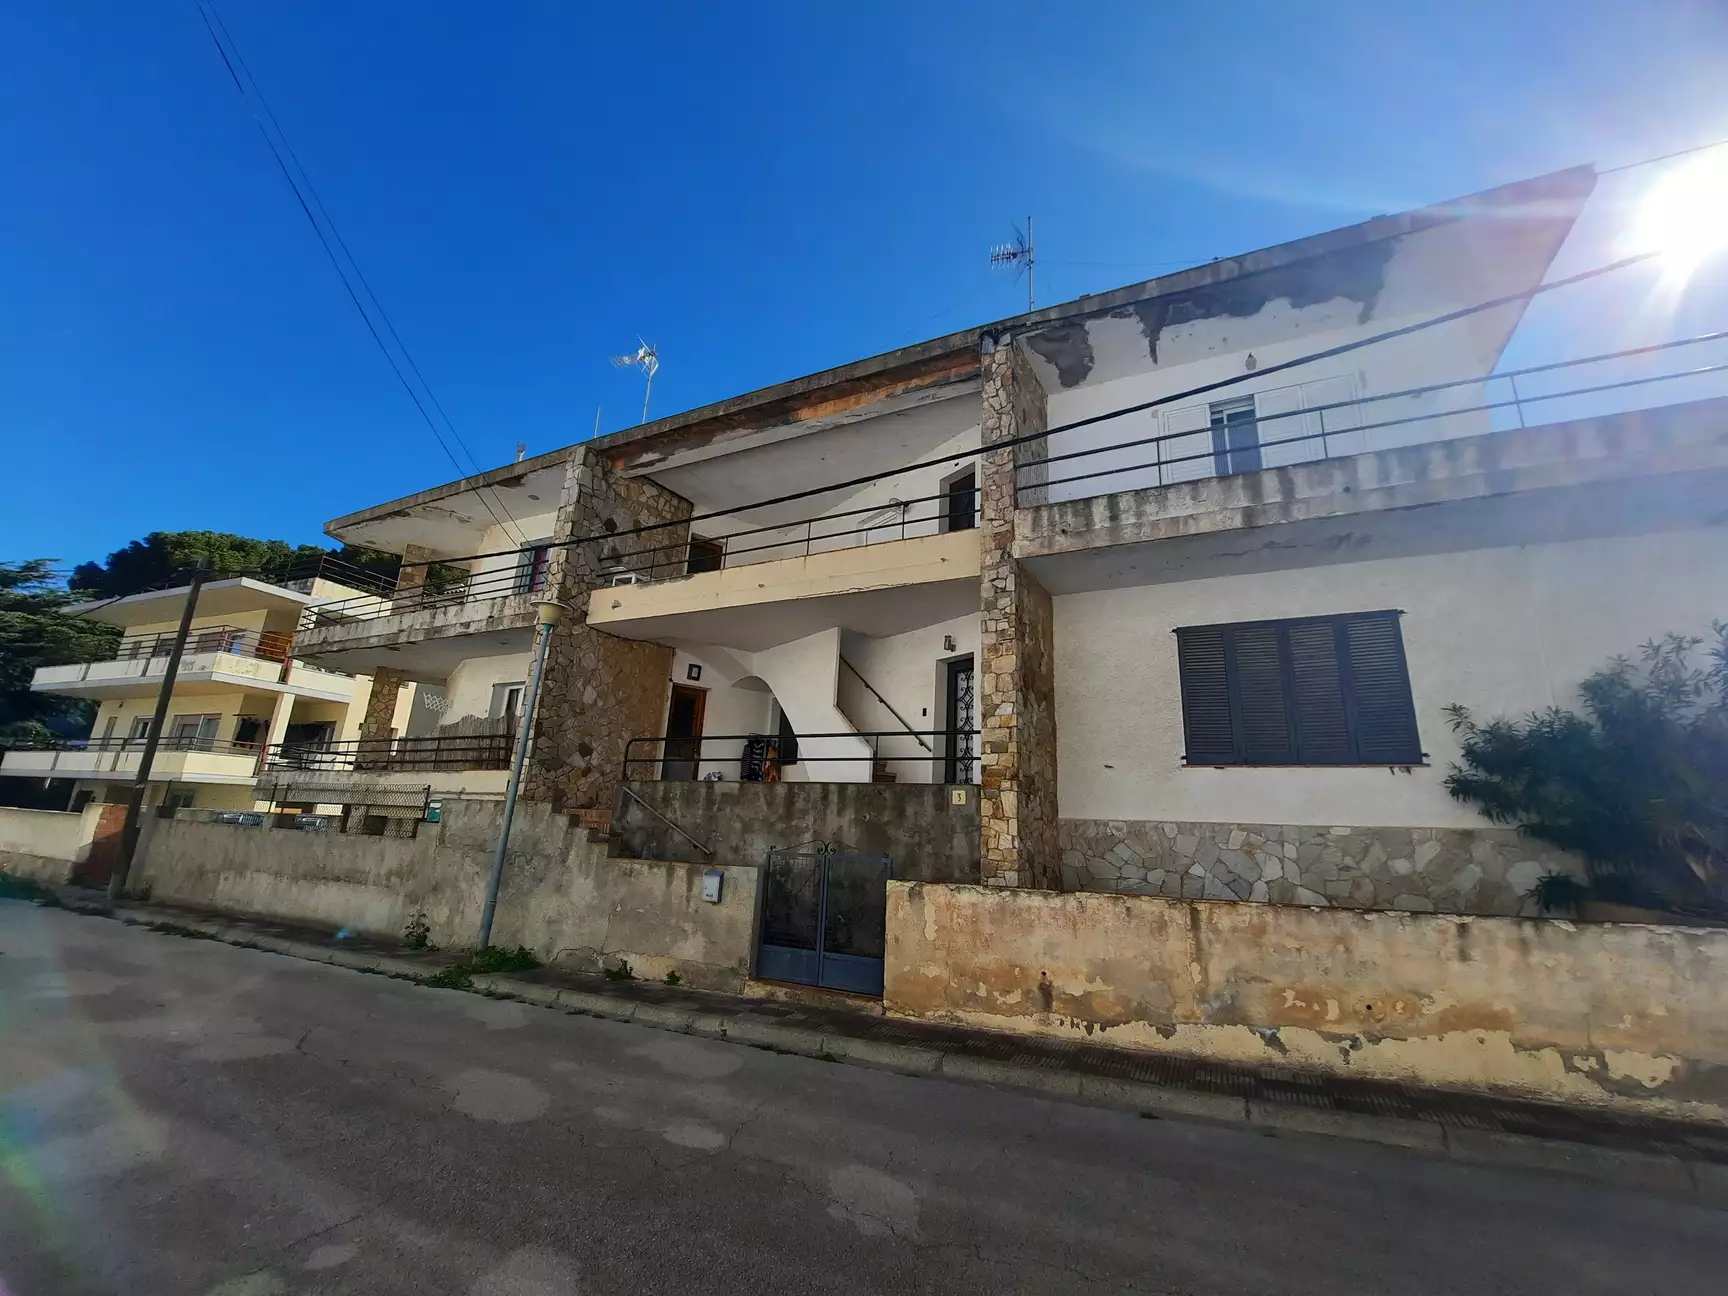 &quot;Investors! Excellent opportunity, 2 floors just 200 meters from the beach in Llança. Don't miss thi